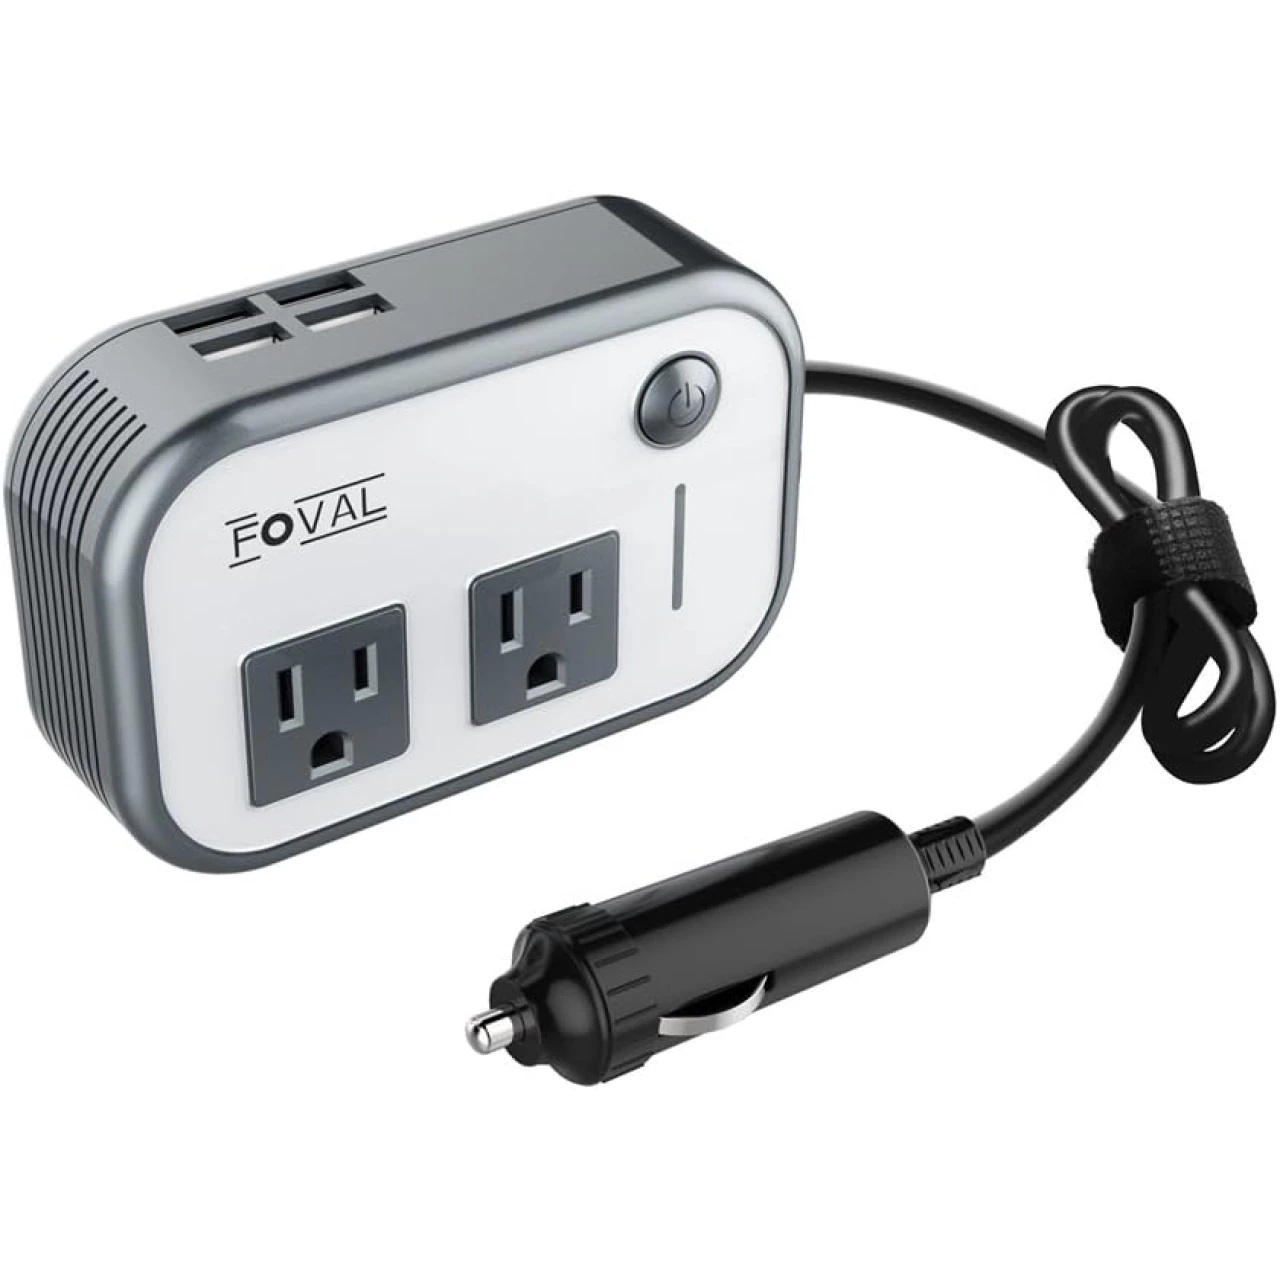 FOVAL 200W Car Power Inverter DC 12V to 110V AC Car Charger with 4 USB Ports Car Adapter for Plug Outlet Converter